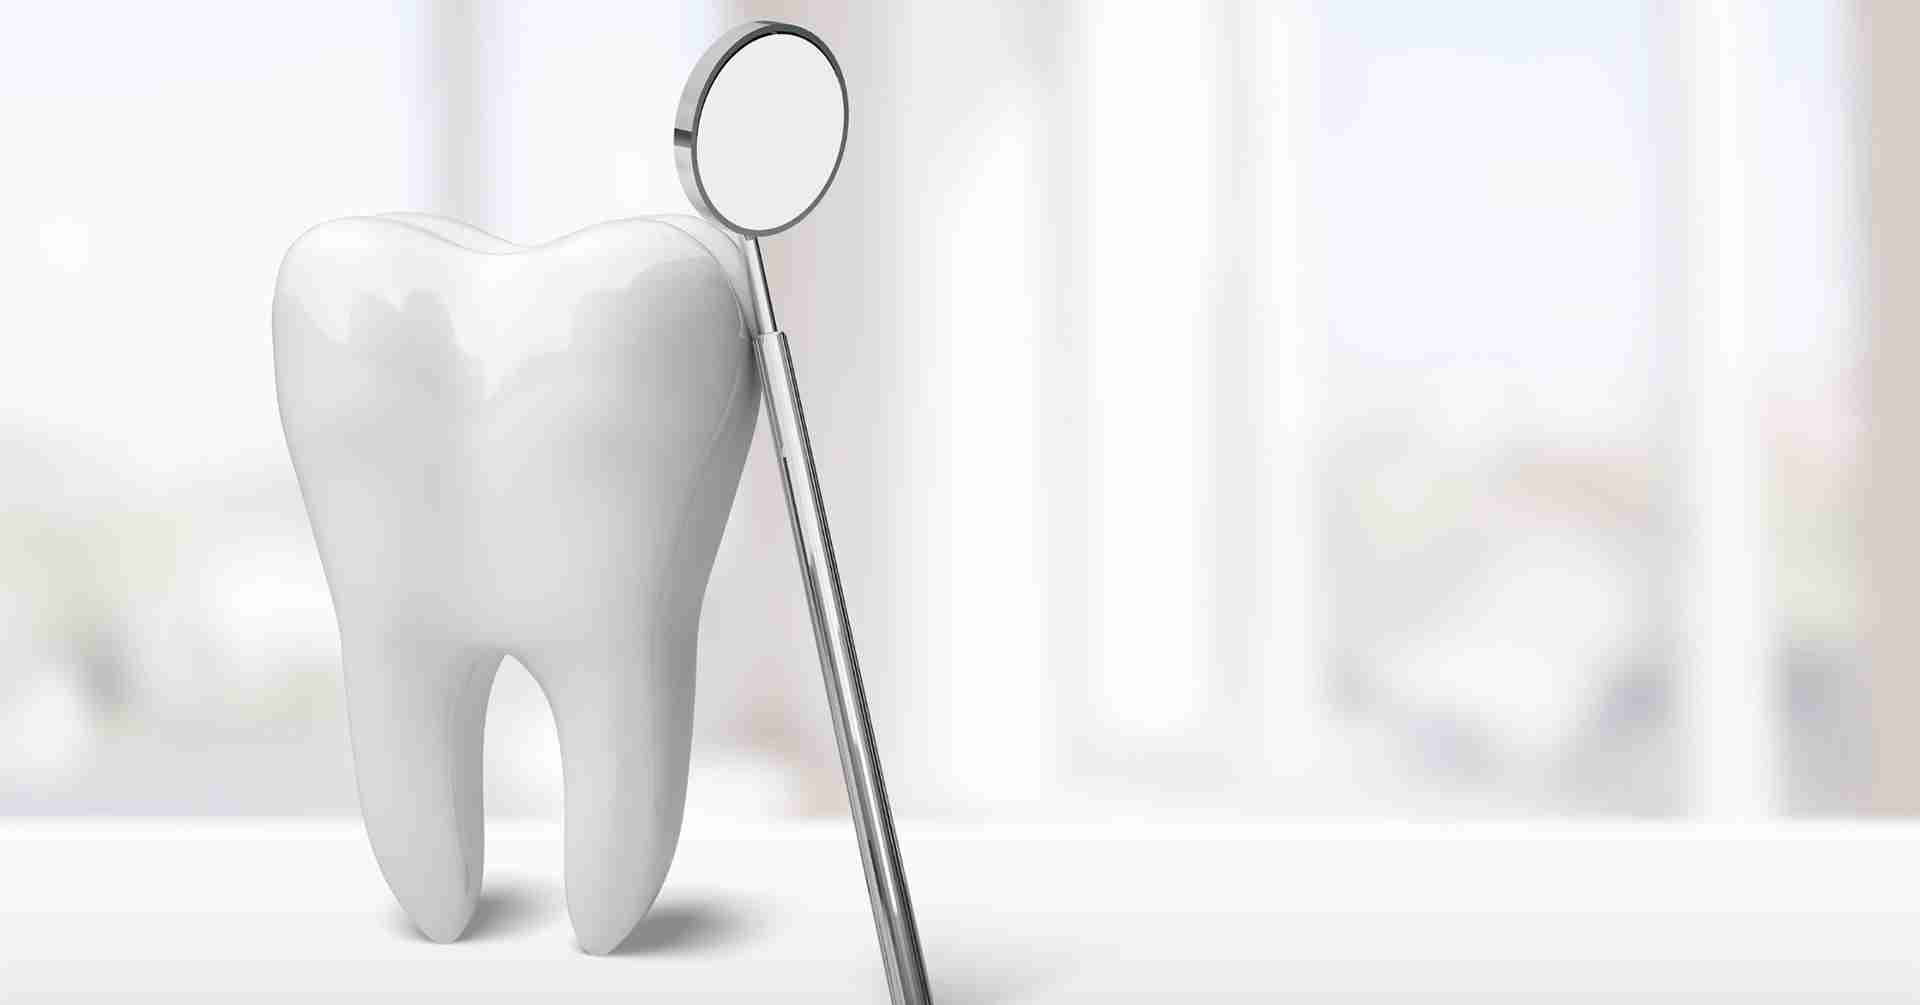 How Does Sugar Affect Your Teeth?